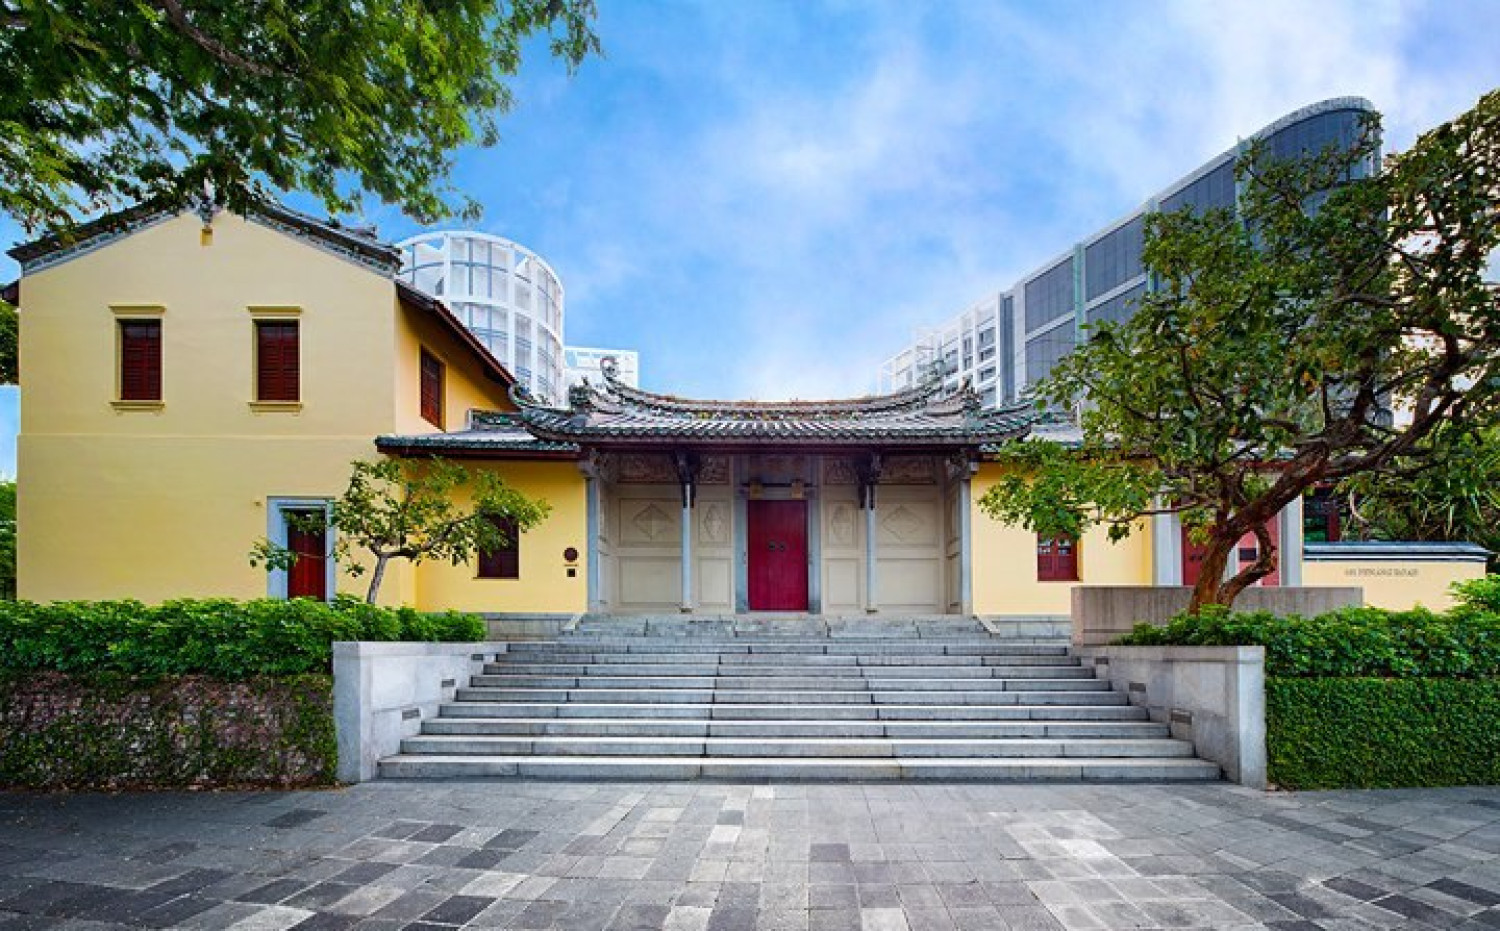 House of Tan Yeok Nee on Clemenceau Avenue and Penang Road for sale at a guide price of $92 mil - Property News